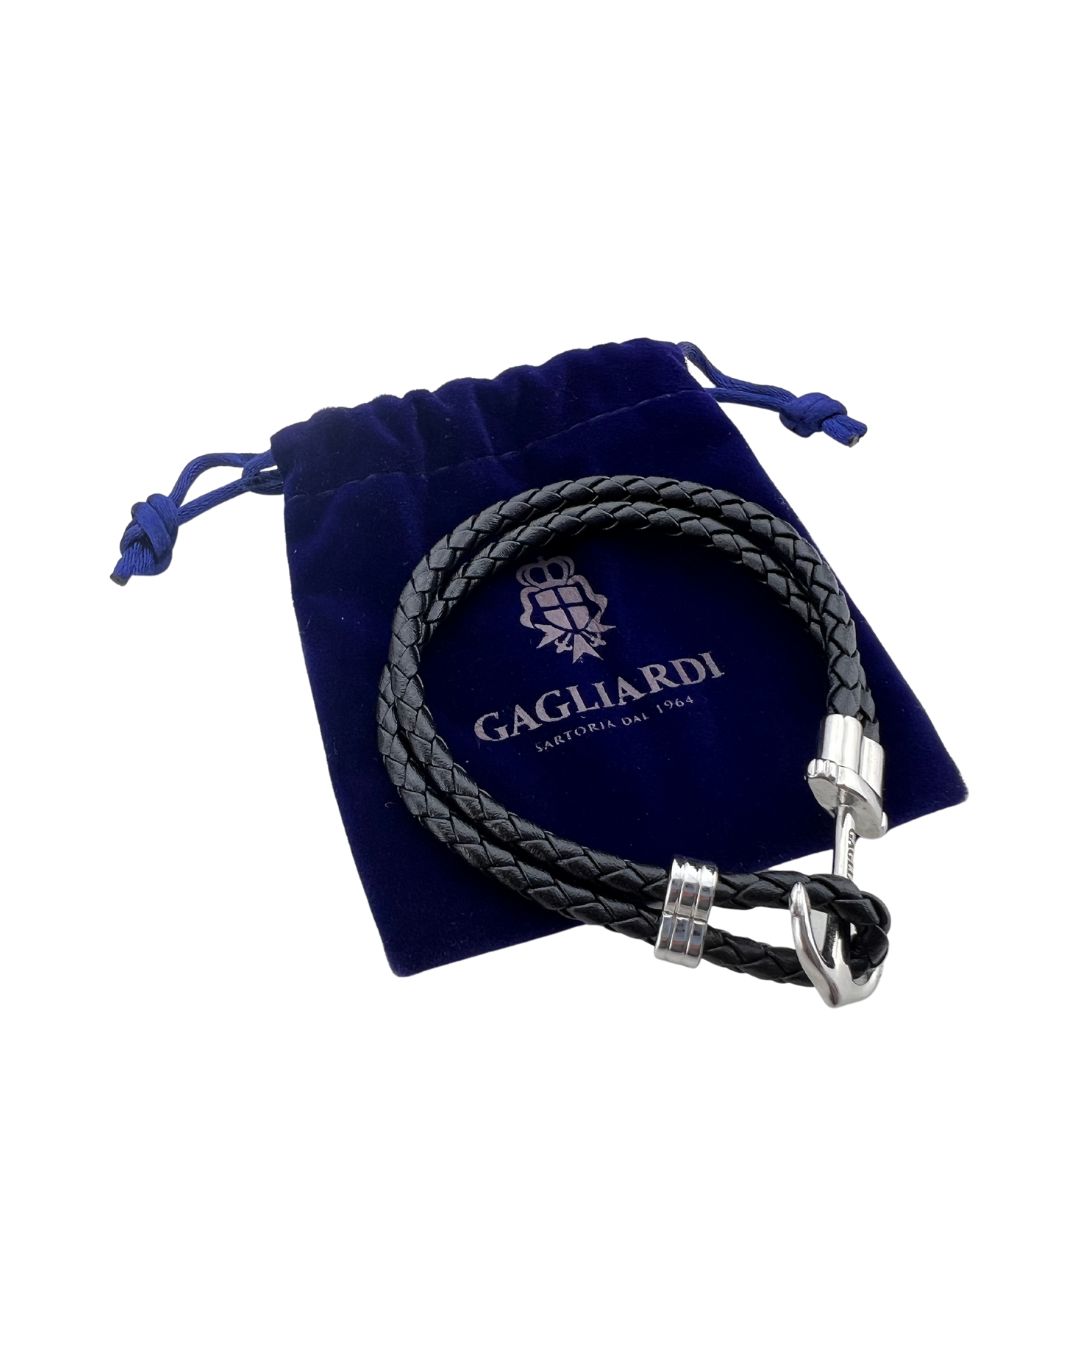 Black Braided Leather Bracelet With Anchor Clasp